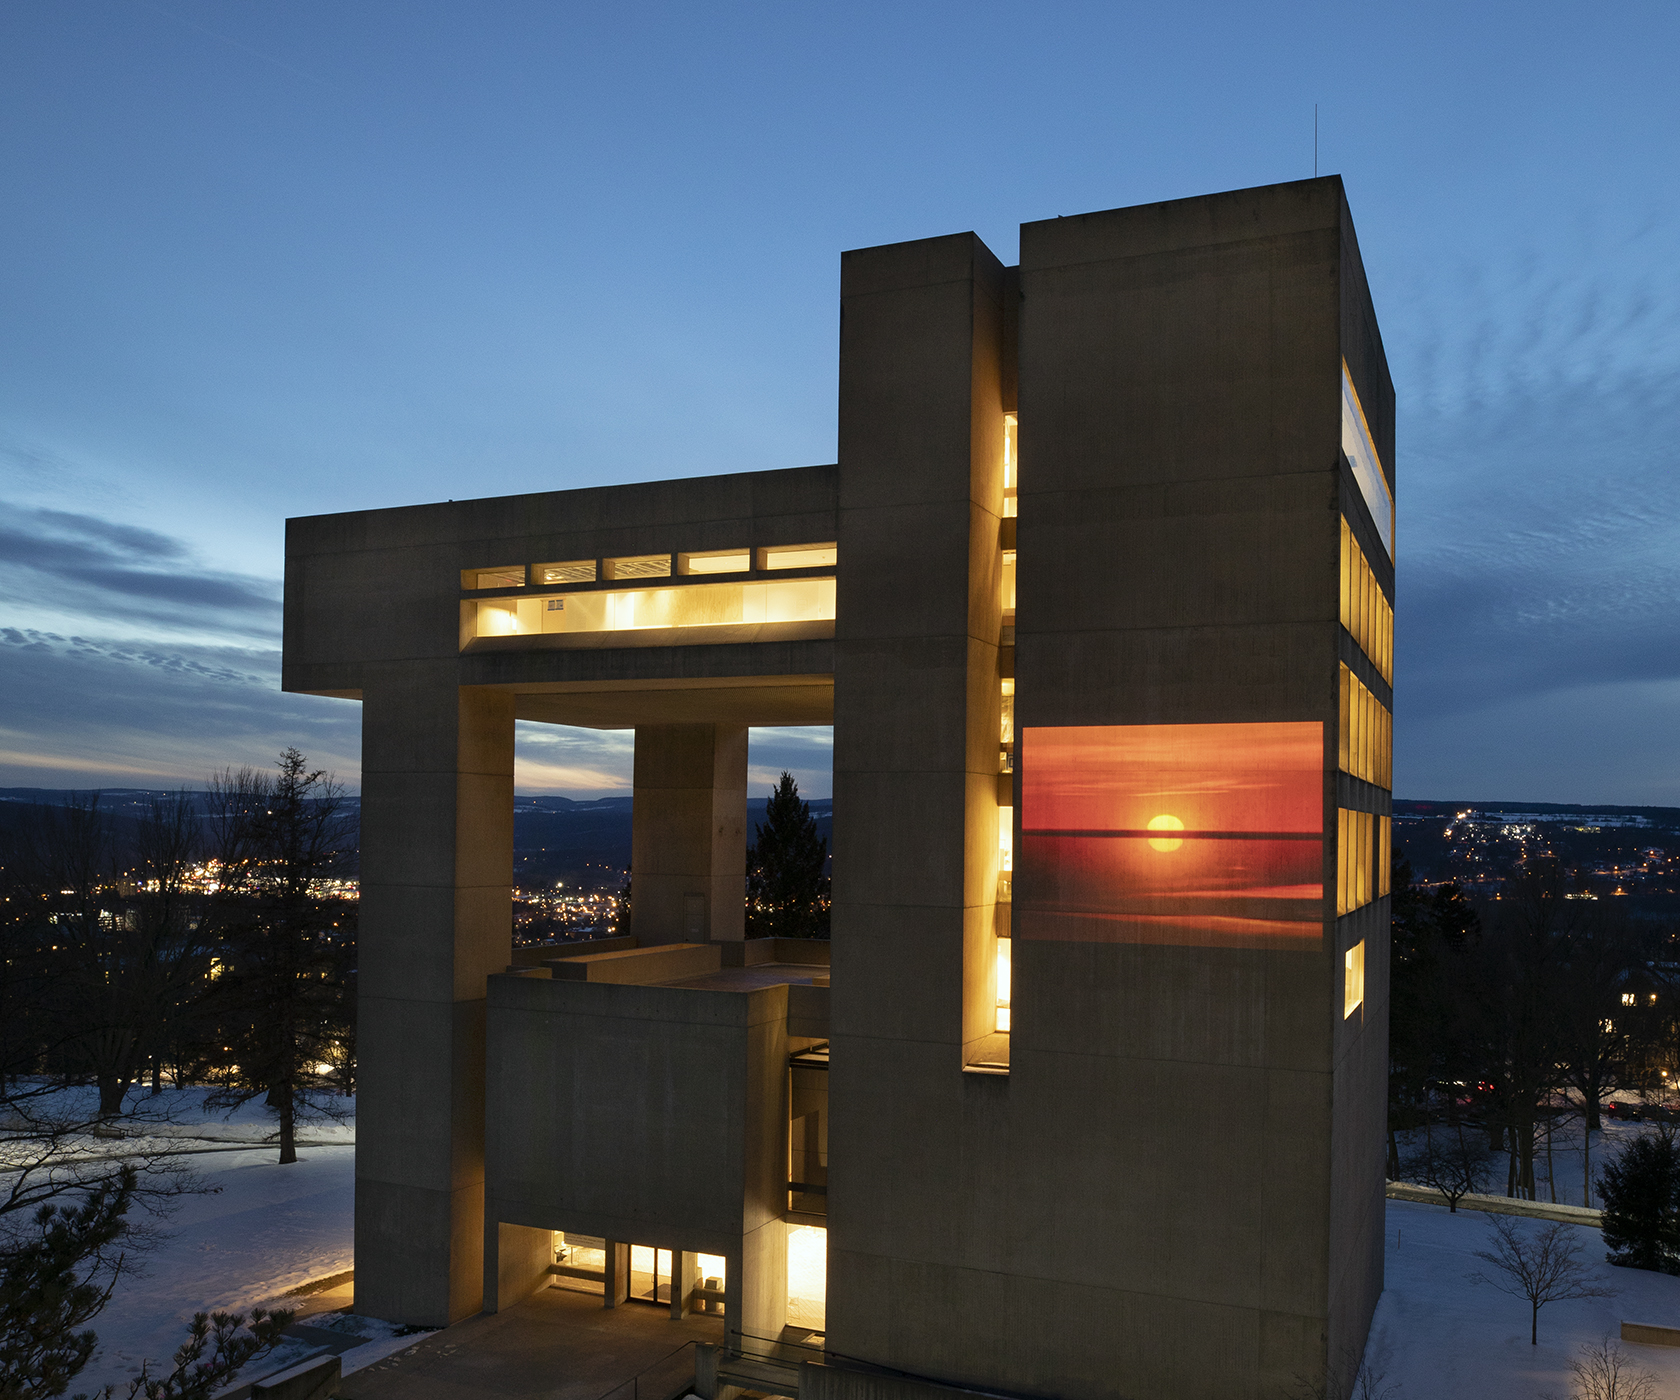 A yellow and orange image of the horizon and sun appears on the facade of the Johnson Museum building at twilight in the snow